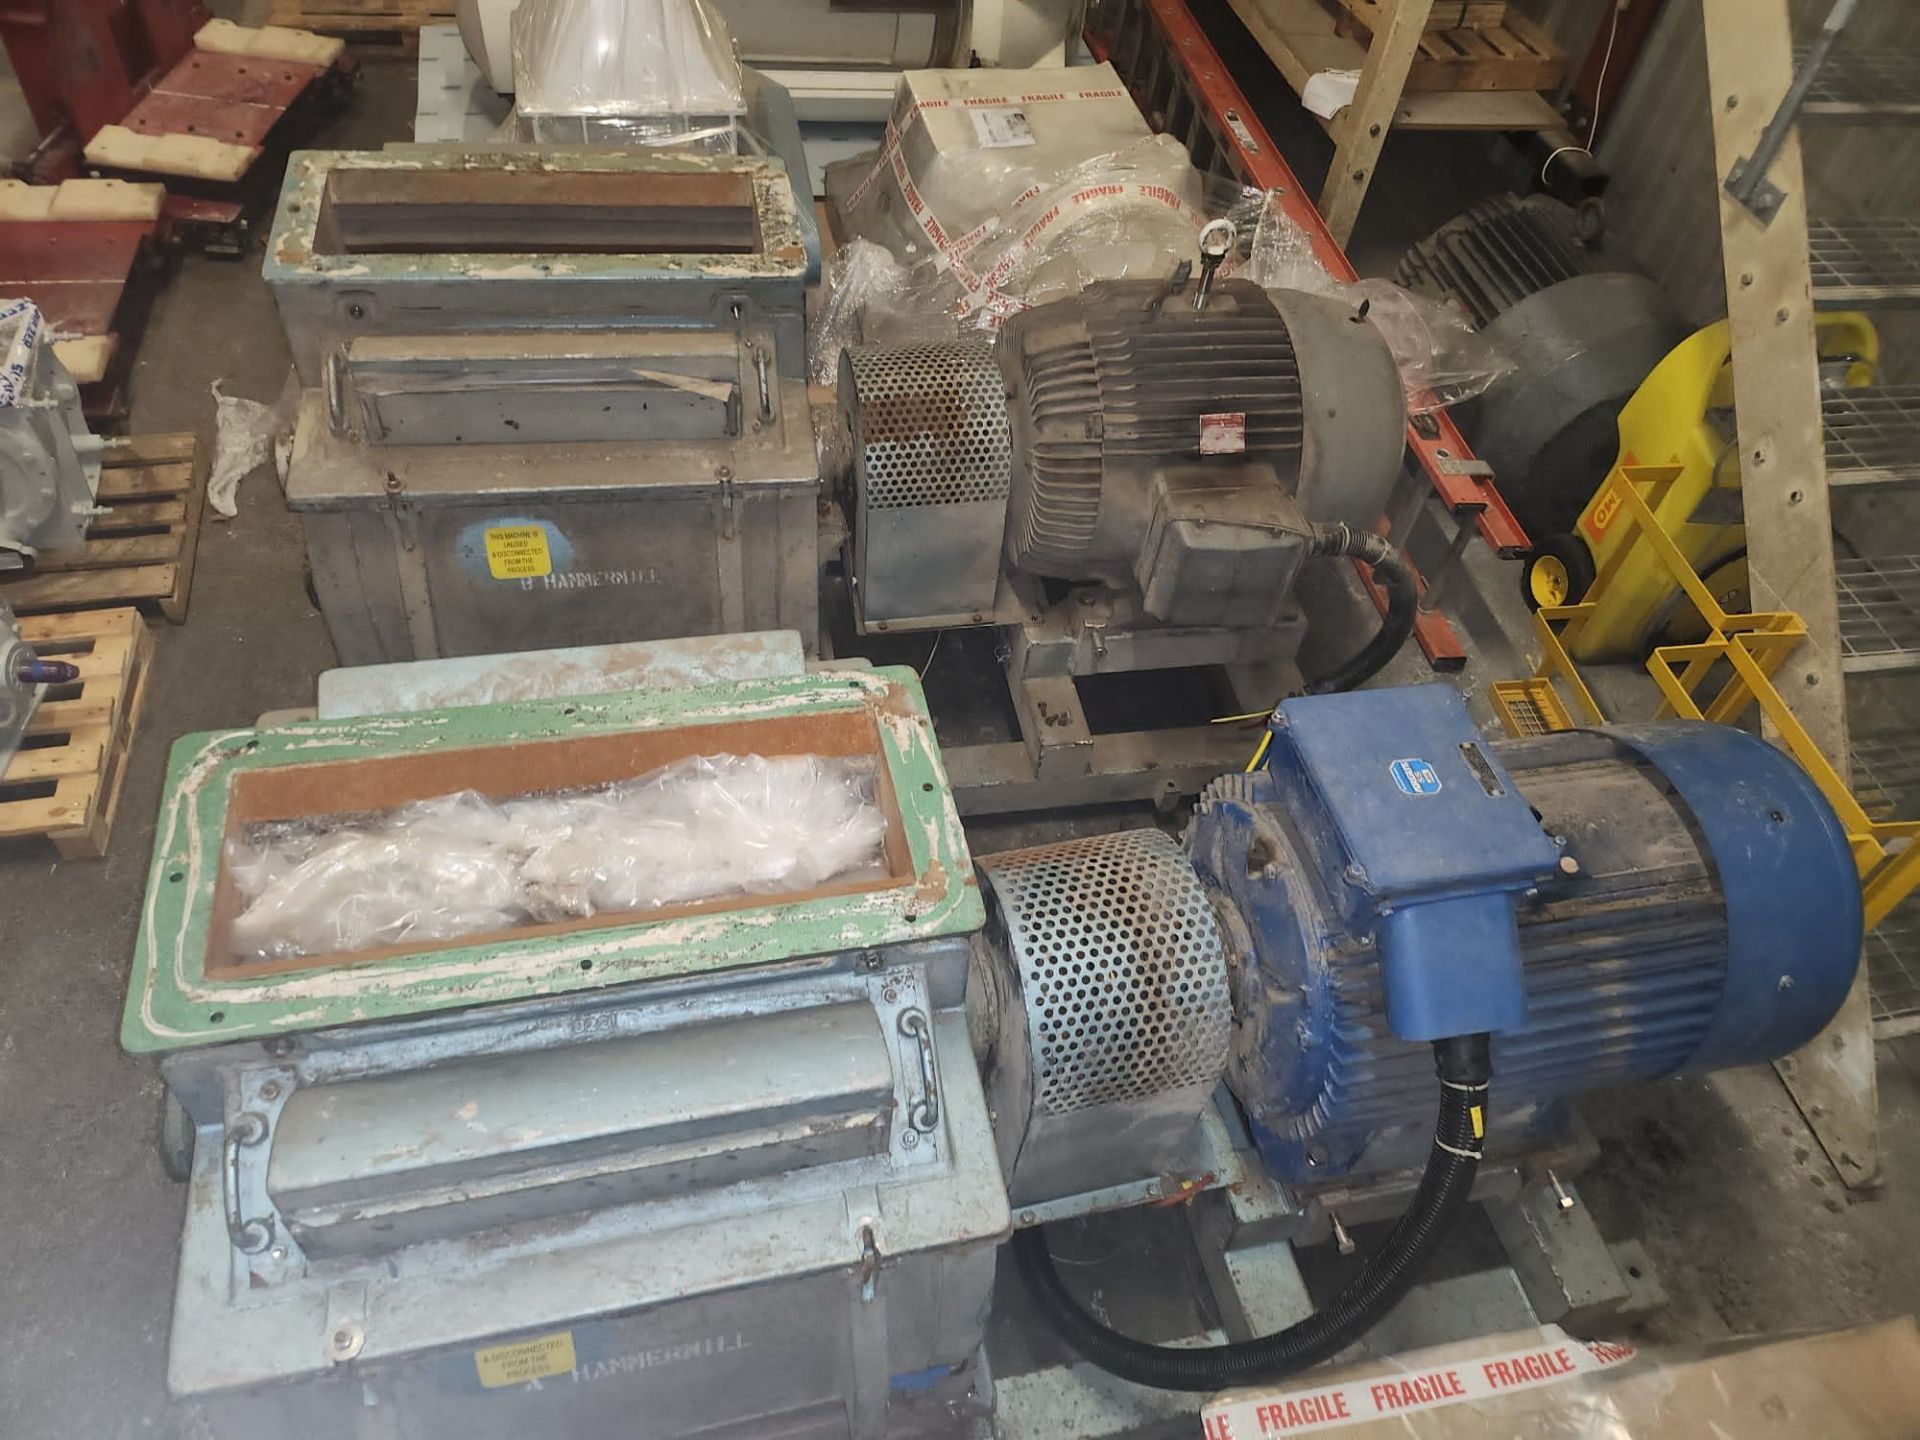 Christy X26 Hammermill, with 90kW blue motor in photo. Loading free of charge - yes. Lot location - Image 2 of 5